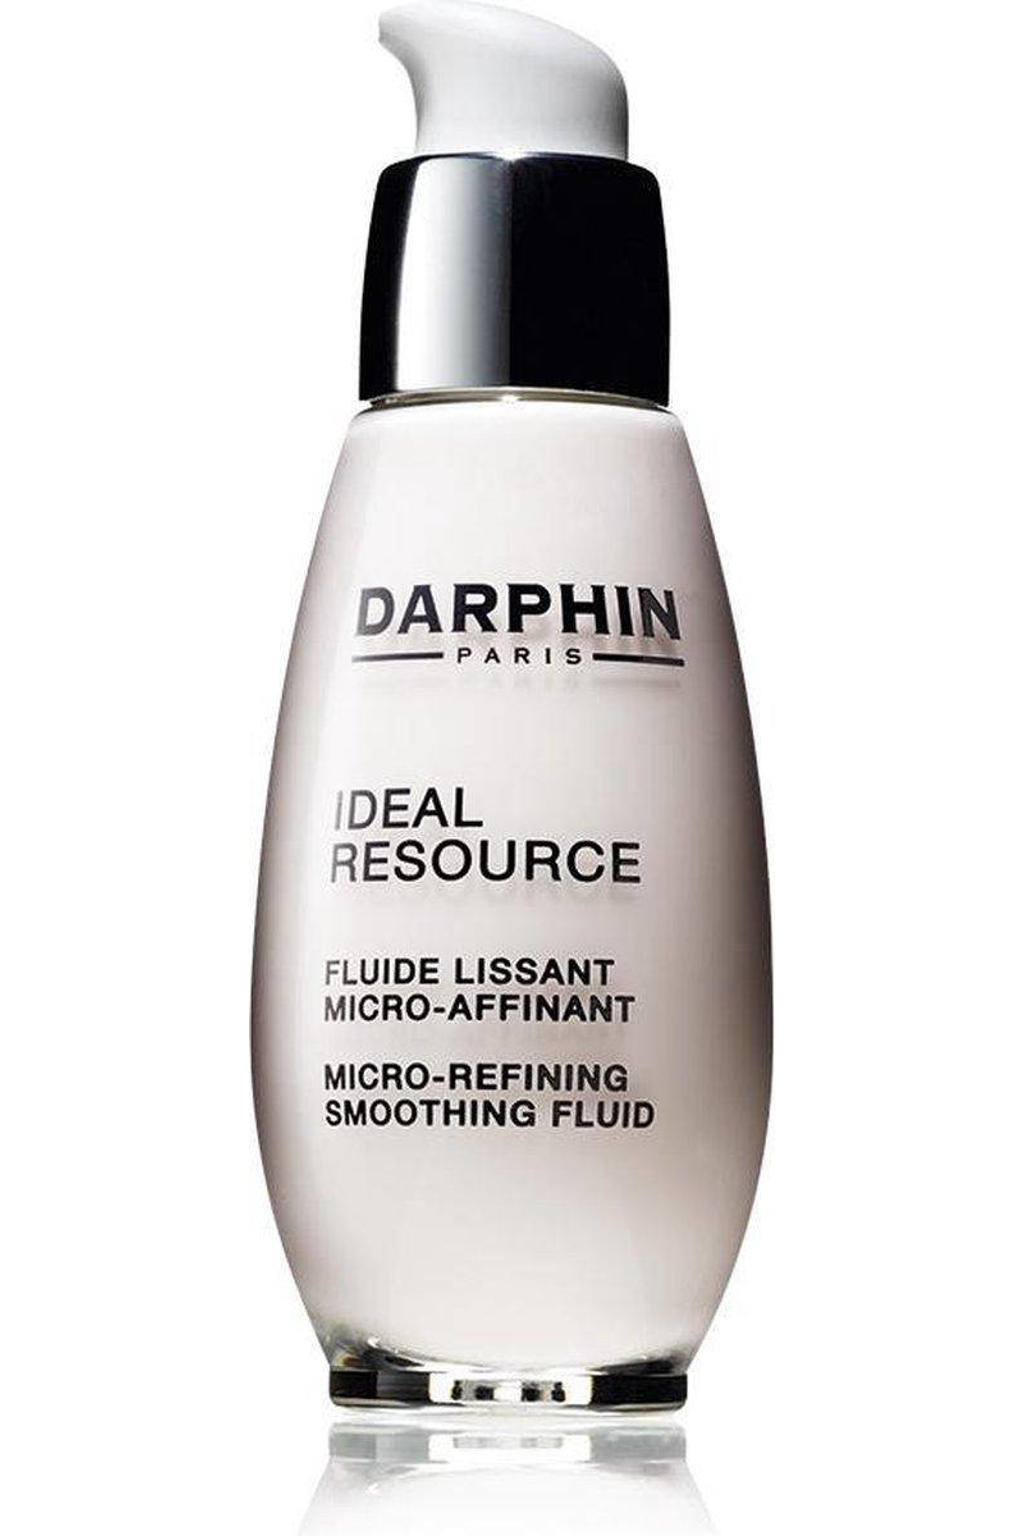 Darphin Ideal Resource micro-refining smoothing fluid